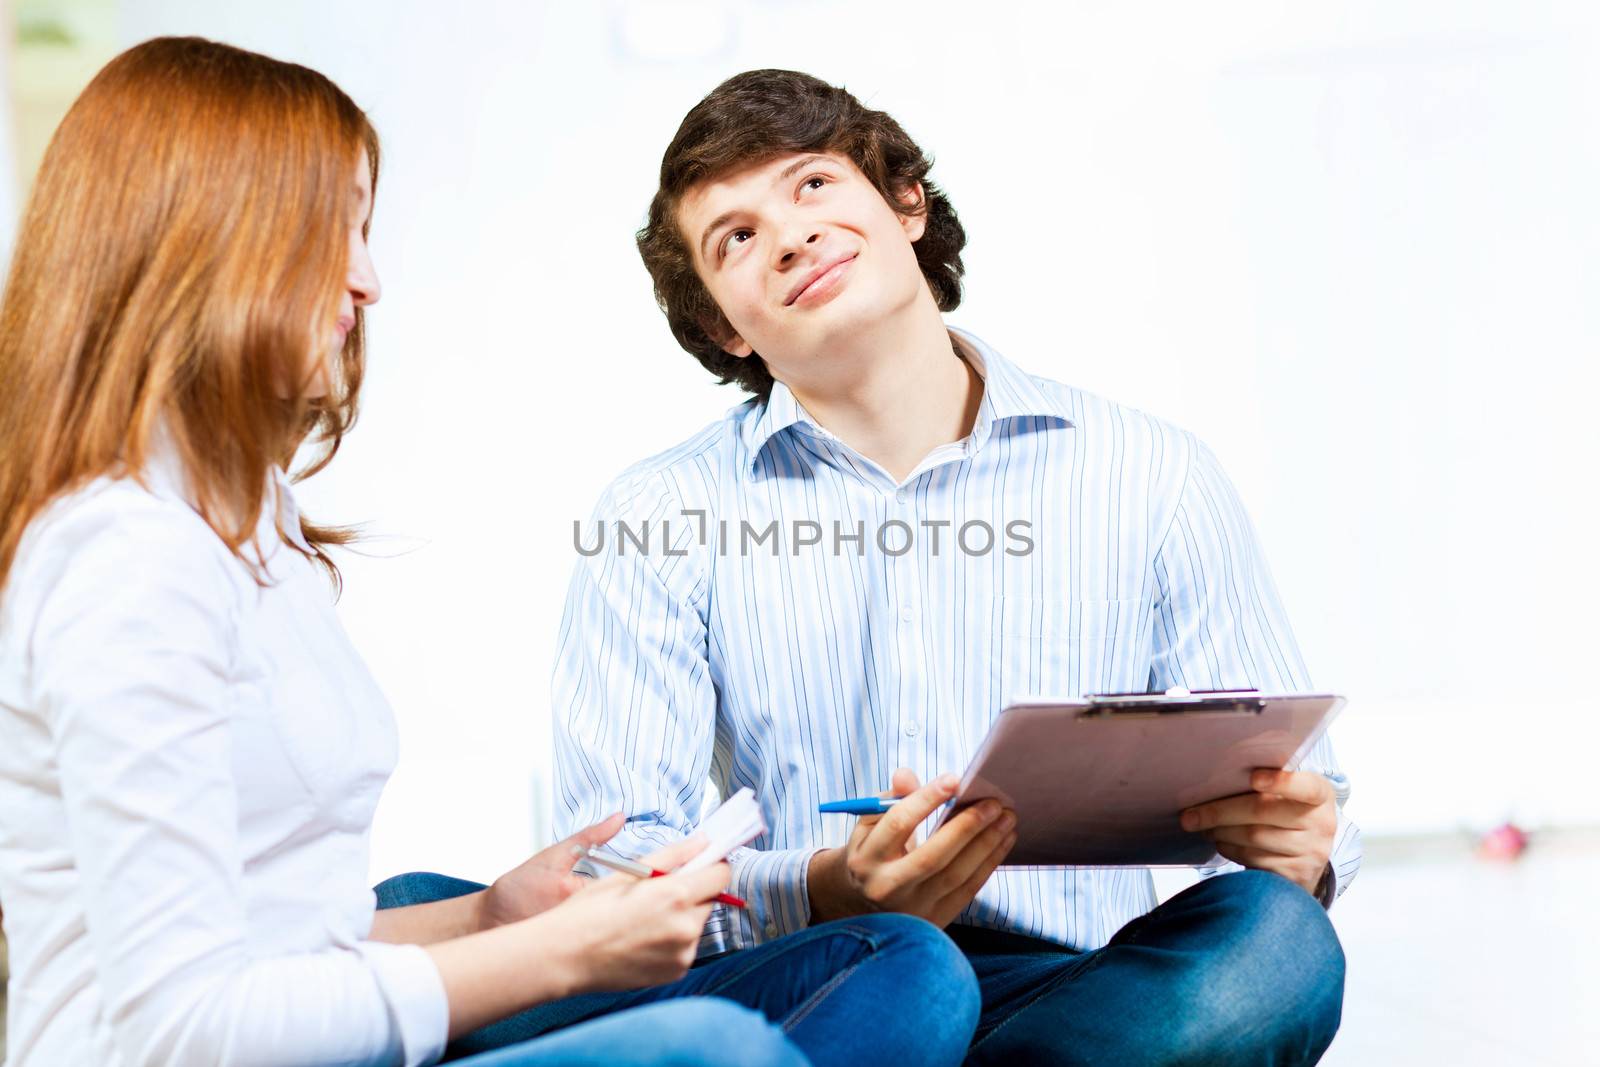 Image of two students discussing their work